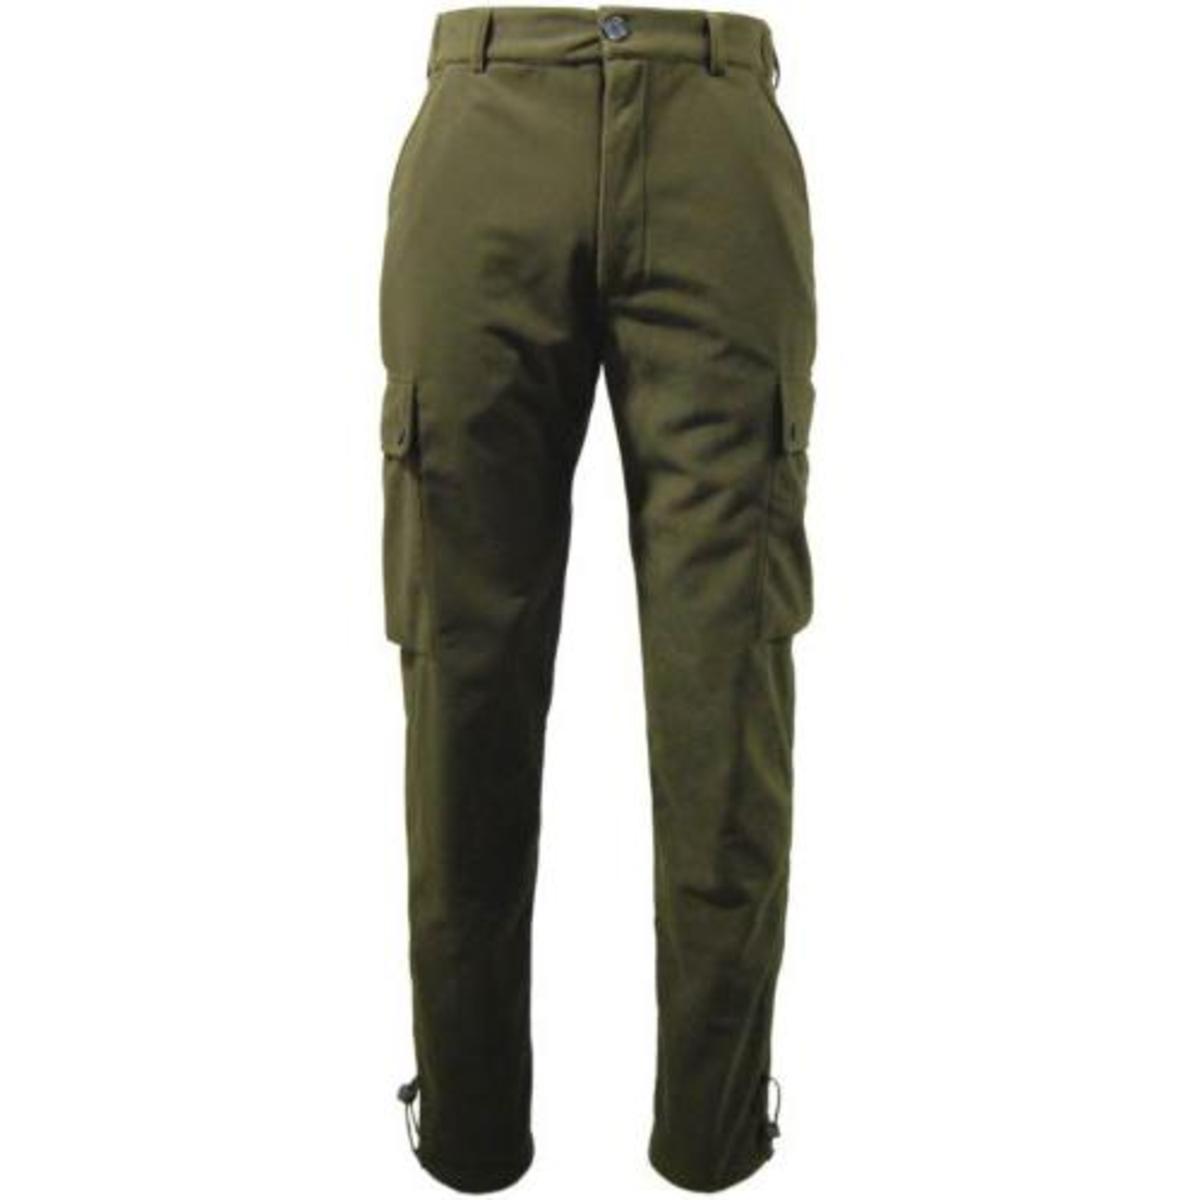 Camo Heated Hunting Pants for Men with Battery Pack - TideWe